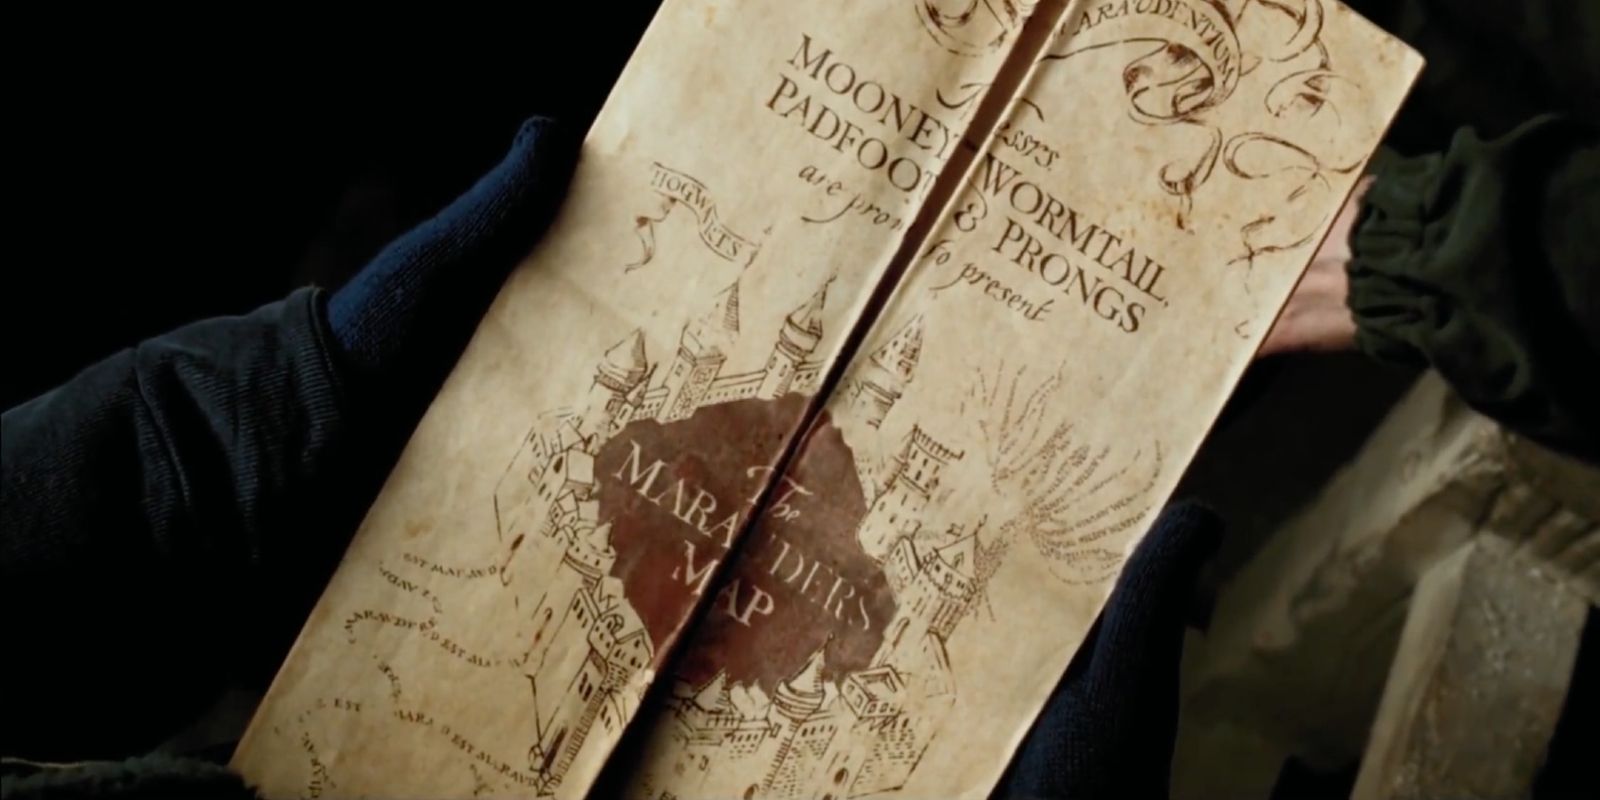 The Marauder's Map as seen in Harry Potter and the Prisoner of Azkaban.